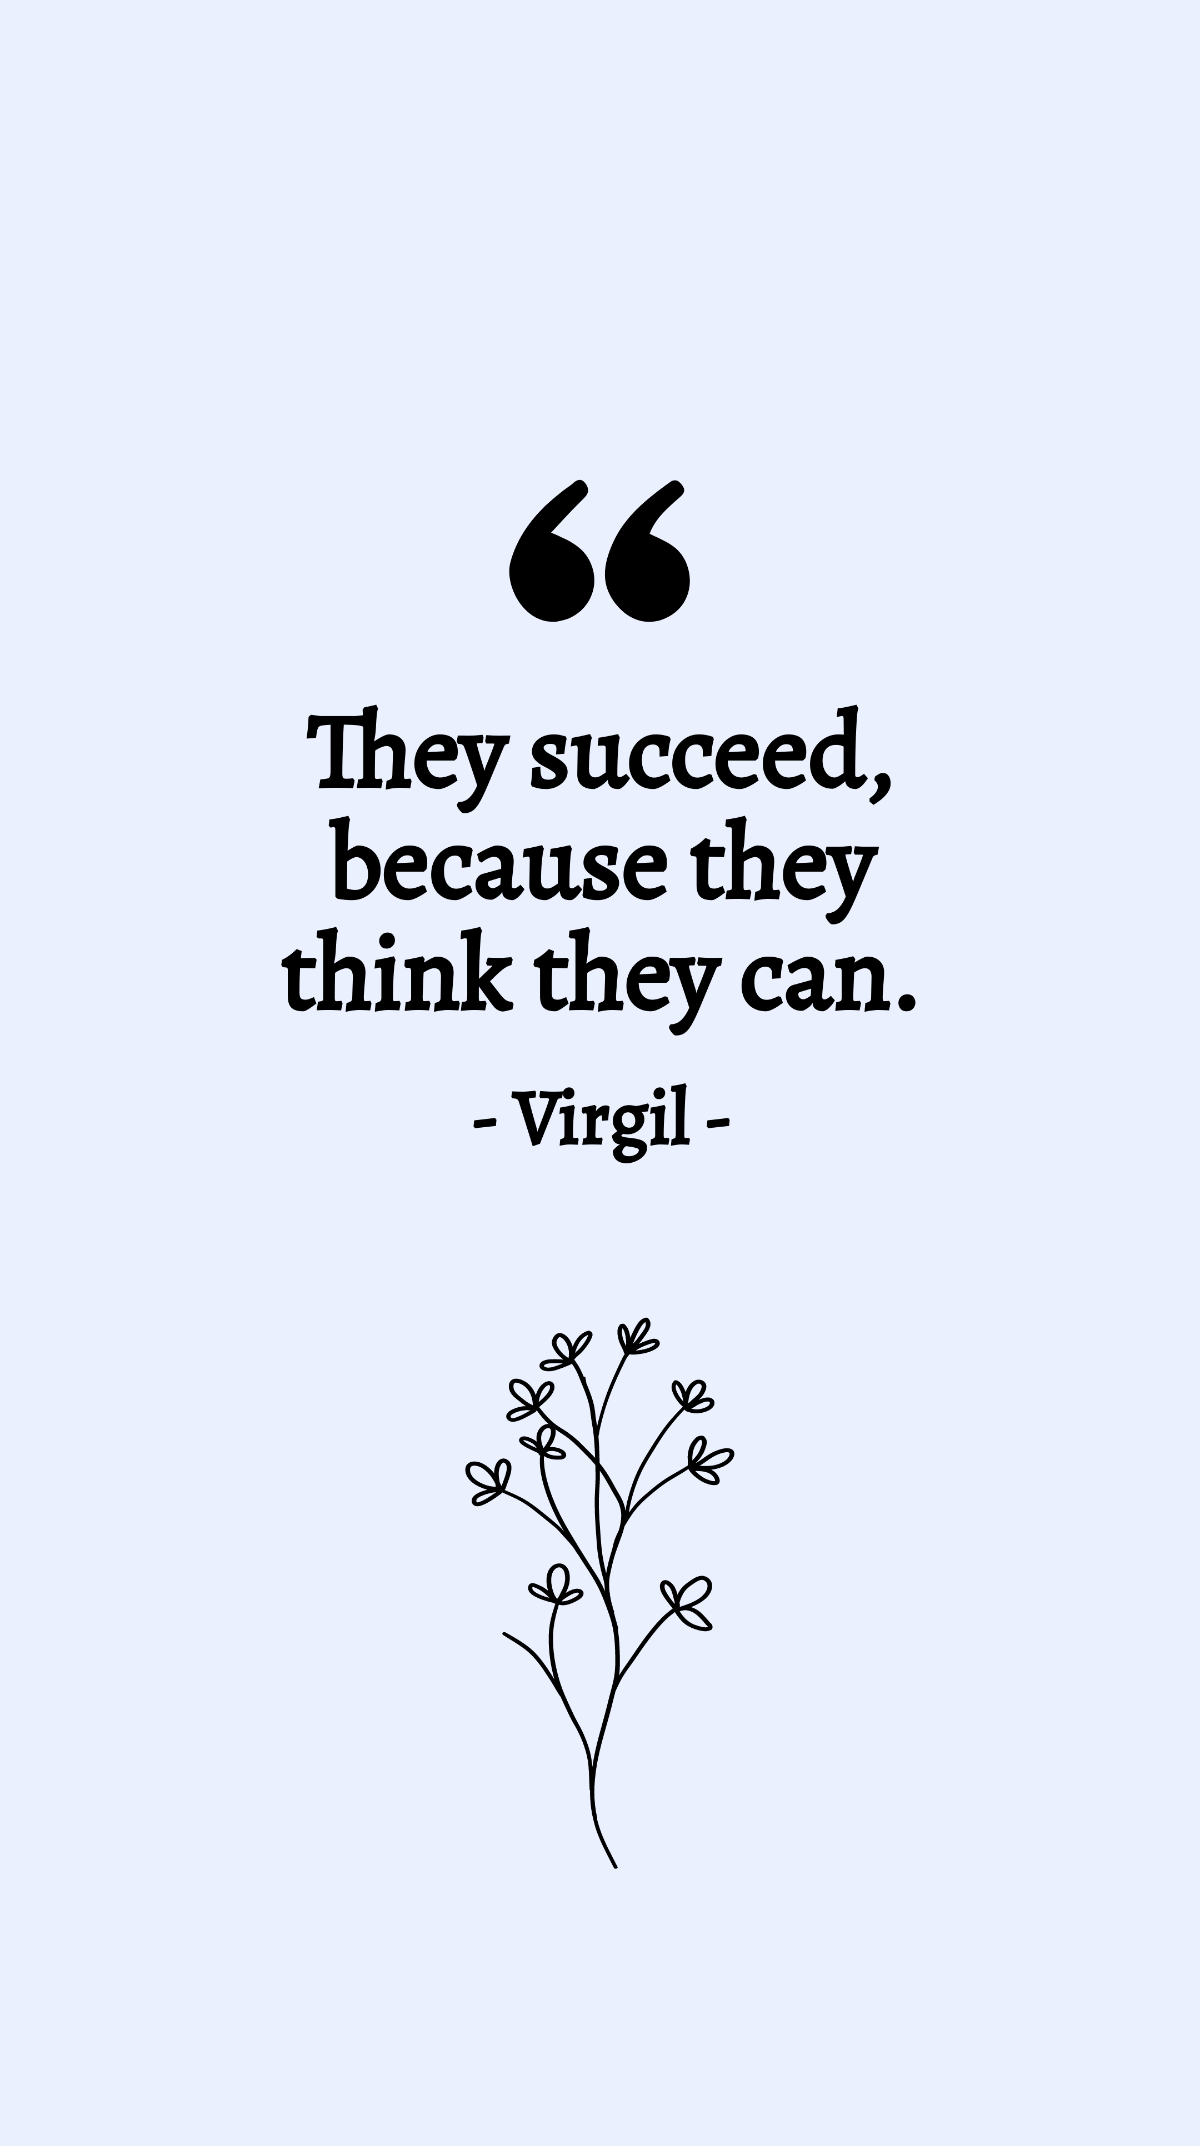 Virgil - They succeed, because they think they can.